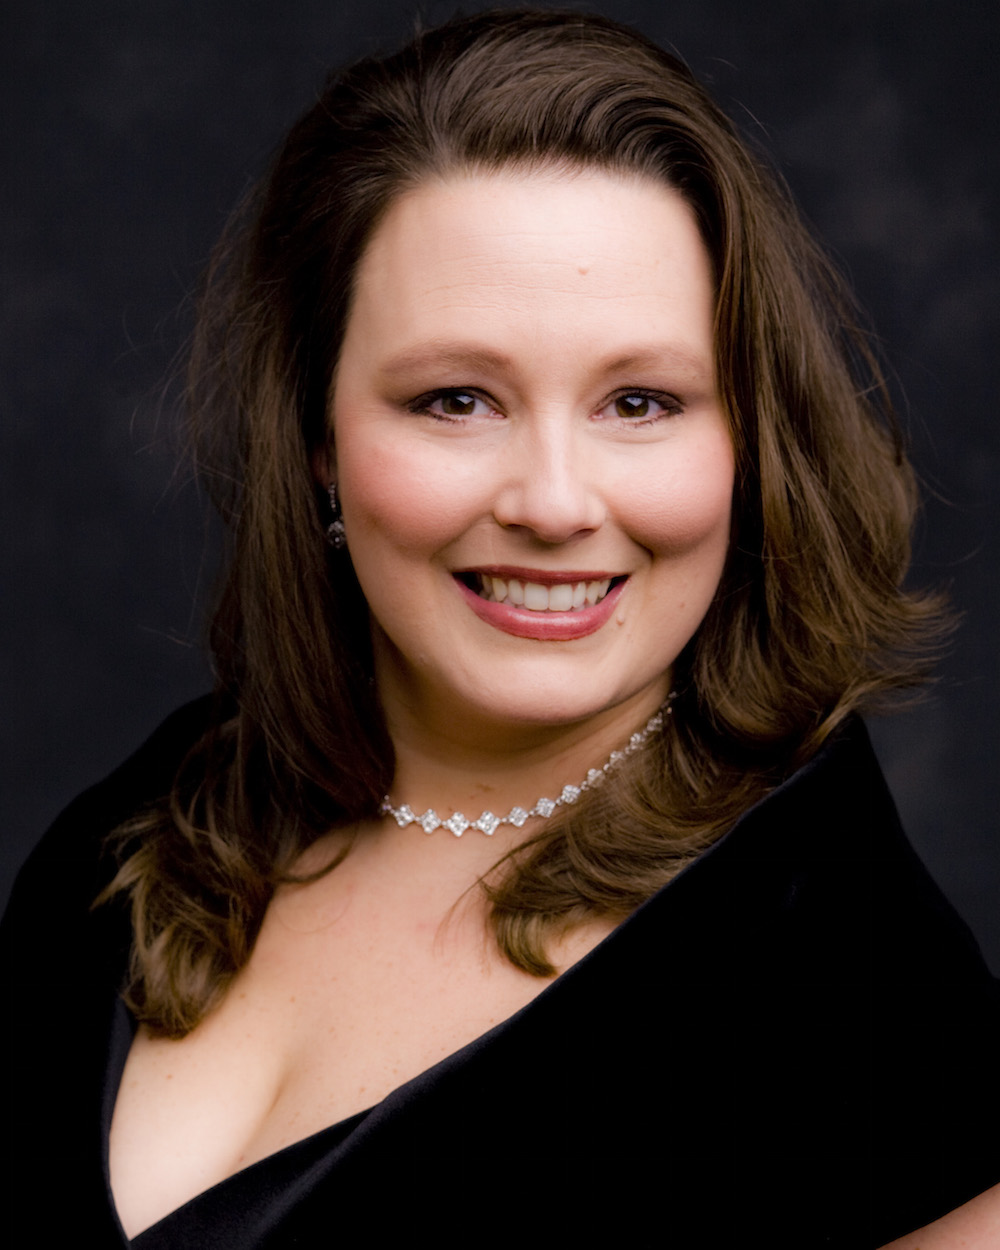 Gallery 1 - Mezzo-soprano Yvette Smith said the “‘Messiah’ is one of the greatest works ever written.”